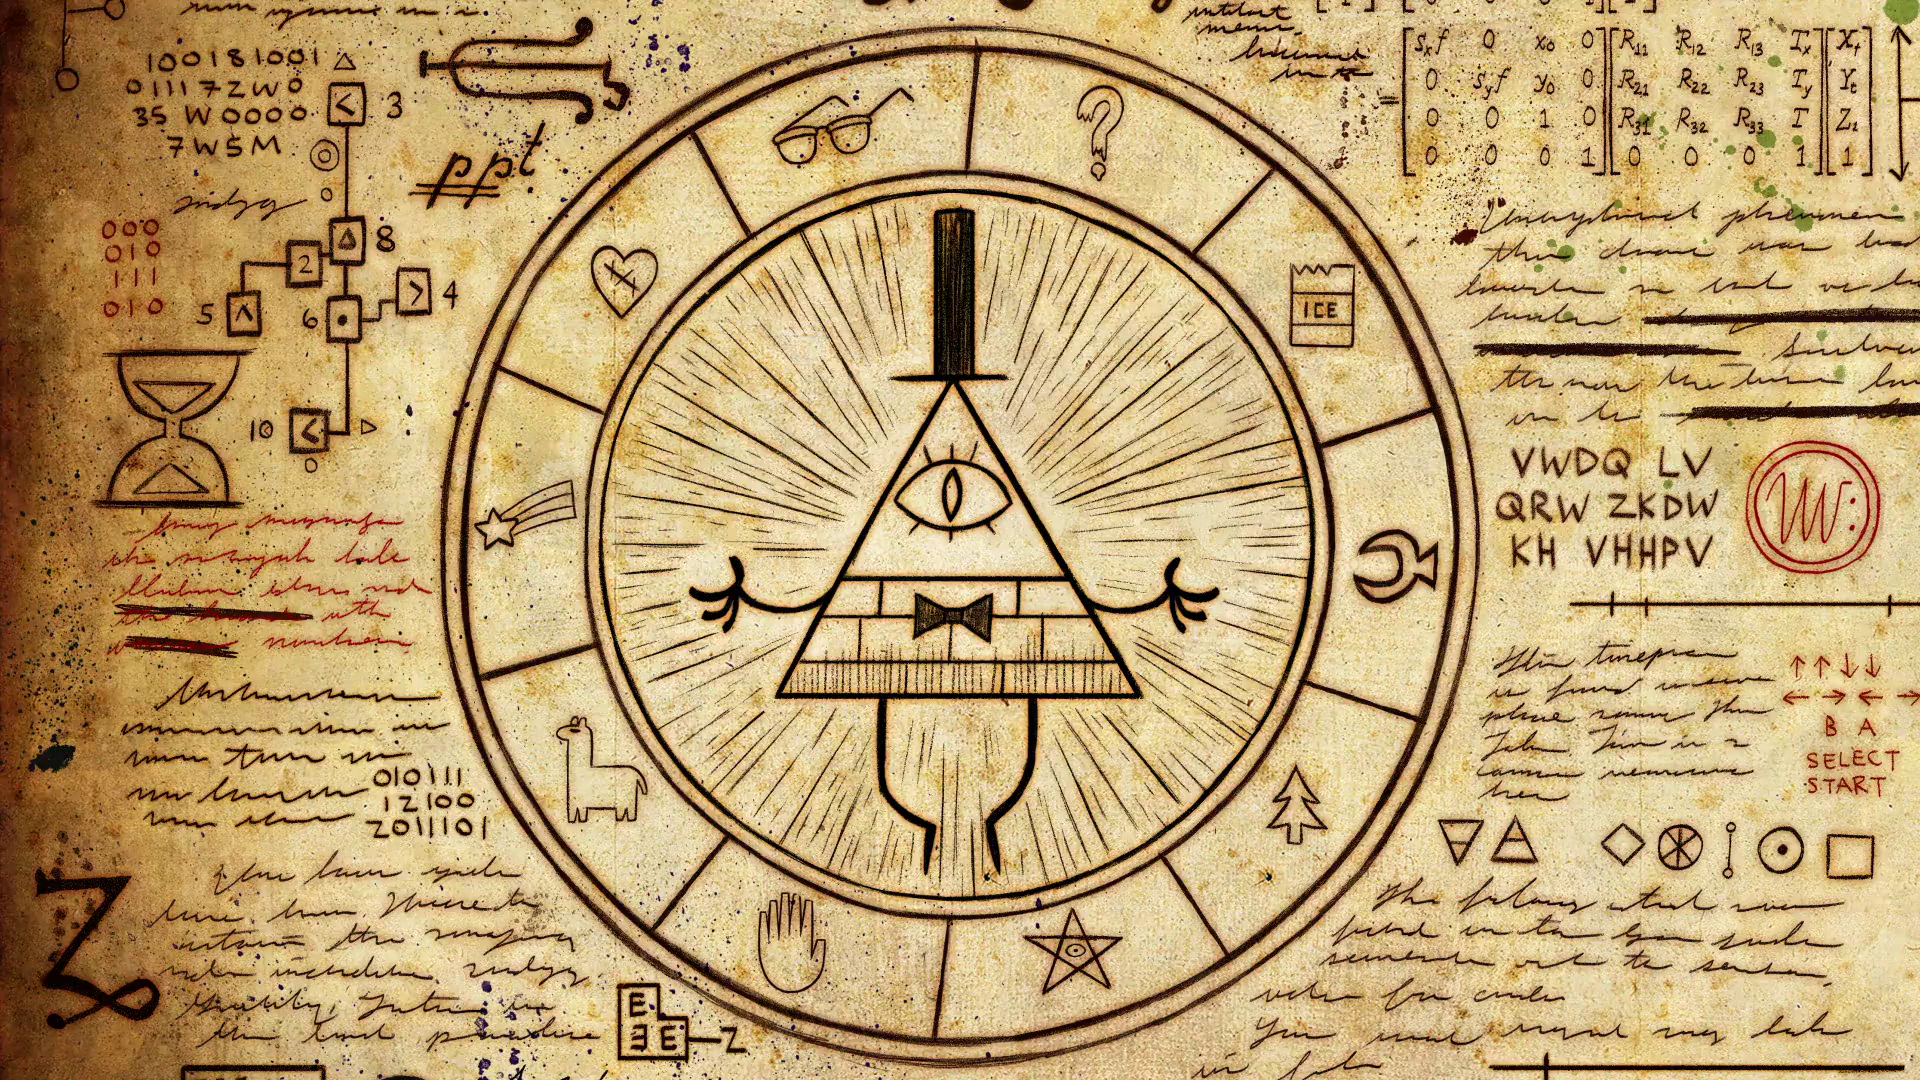 Buy Bill Cypher Signed 8x10 Print Gravity Falls Online in India  Etsy